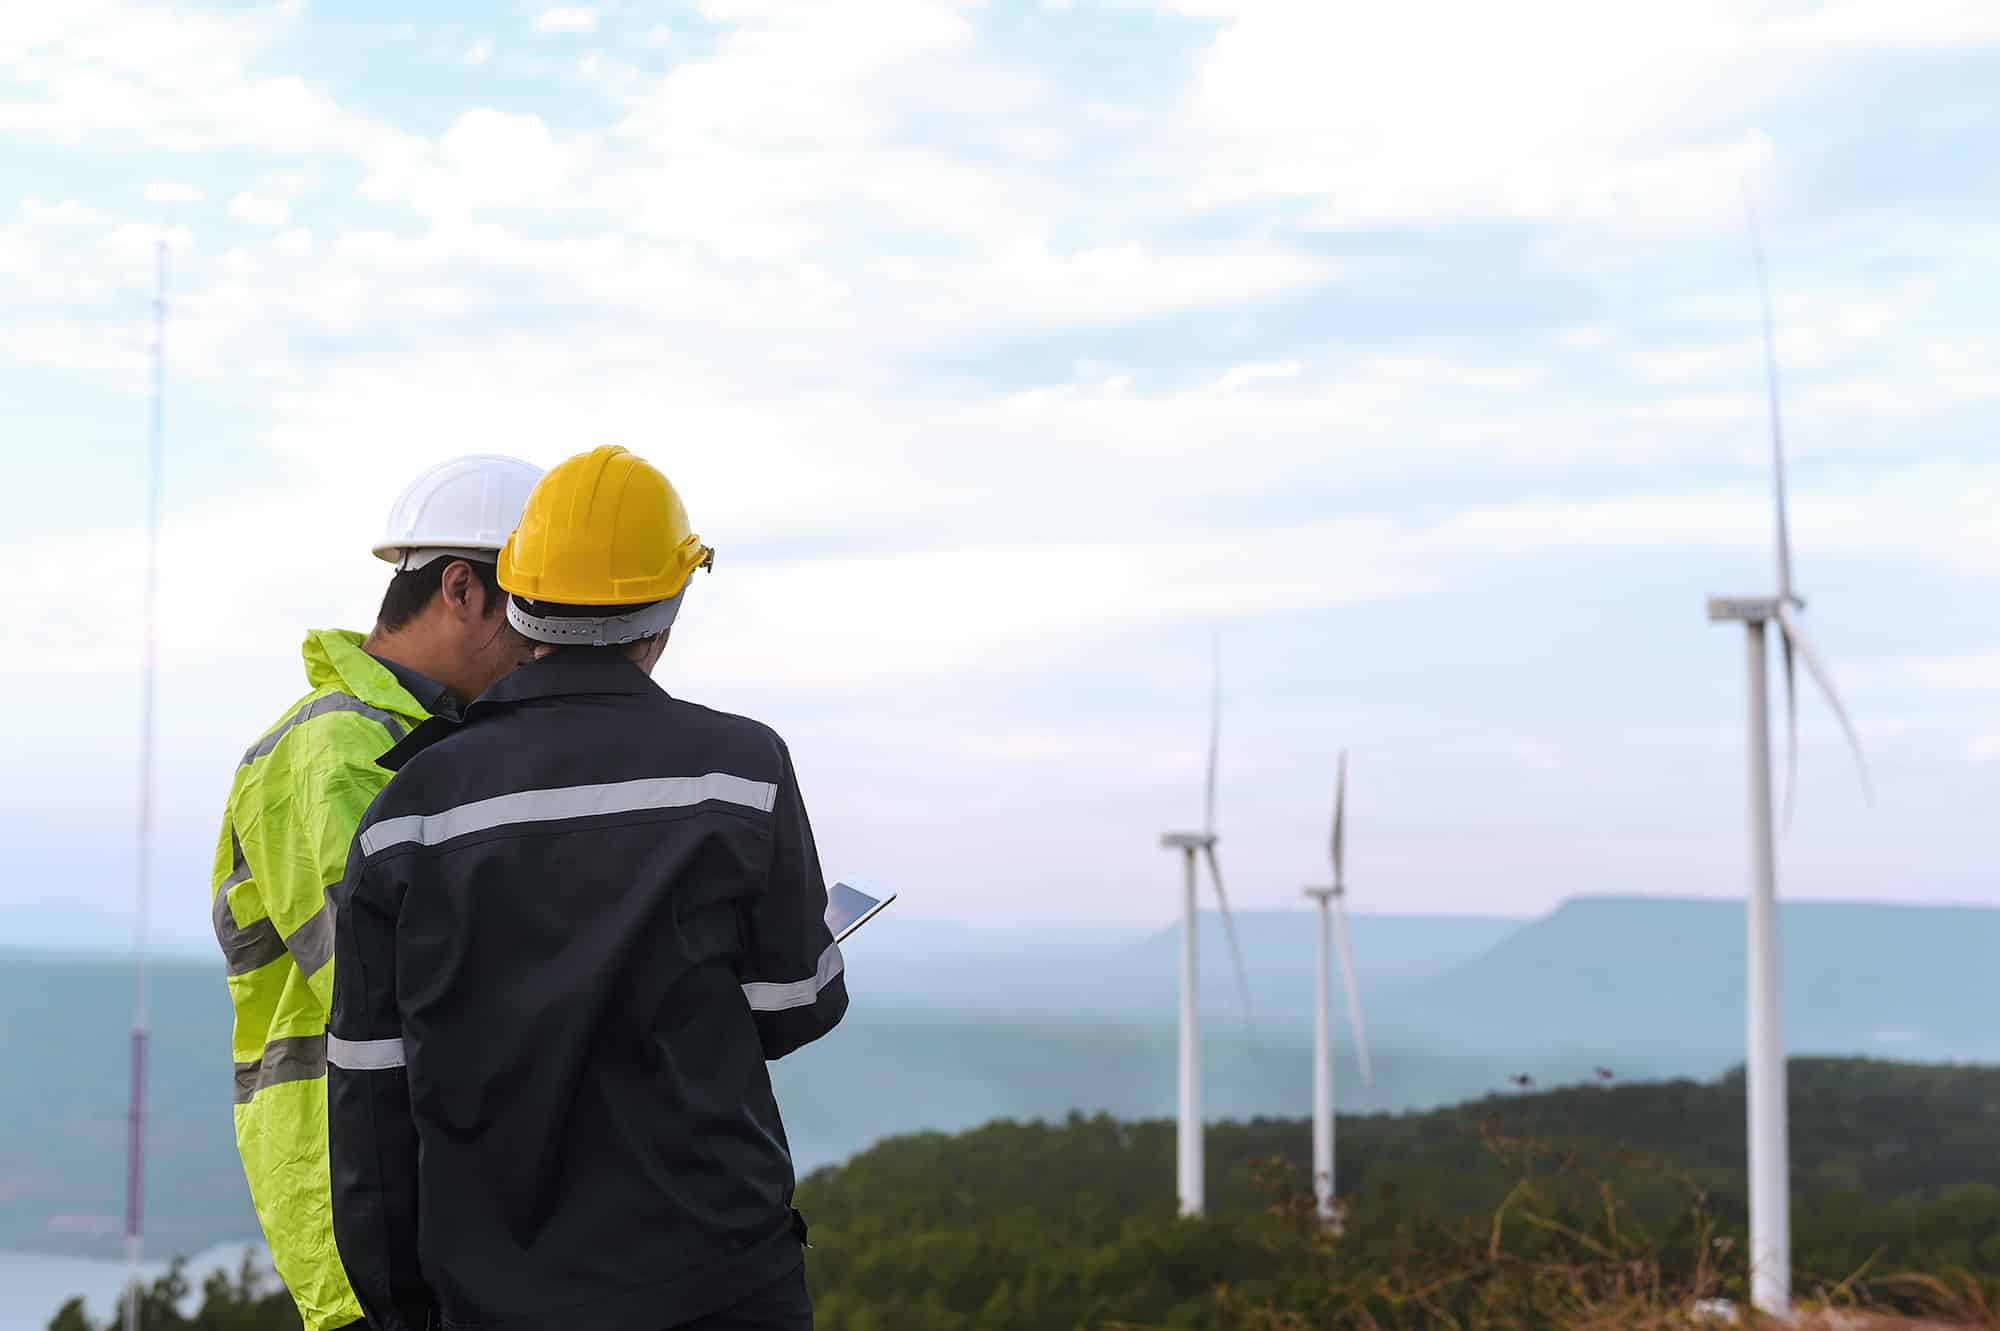 Outsourcing to sub-suppliers can be beneficial. Here are two construction workers in front of some wind turbines.